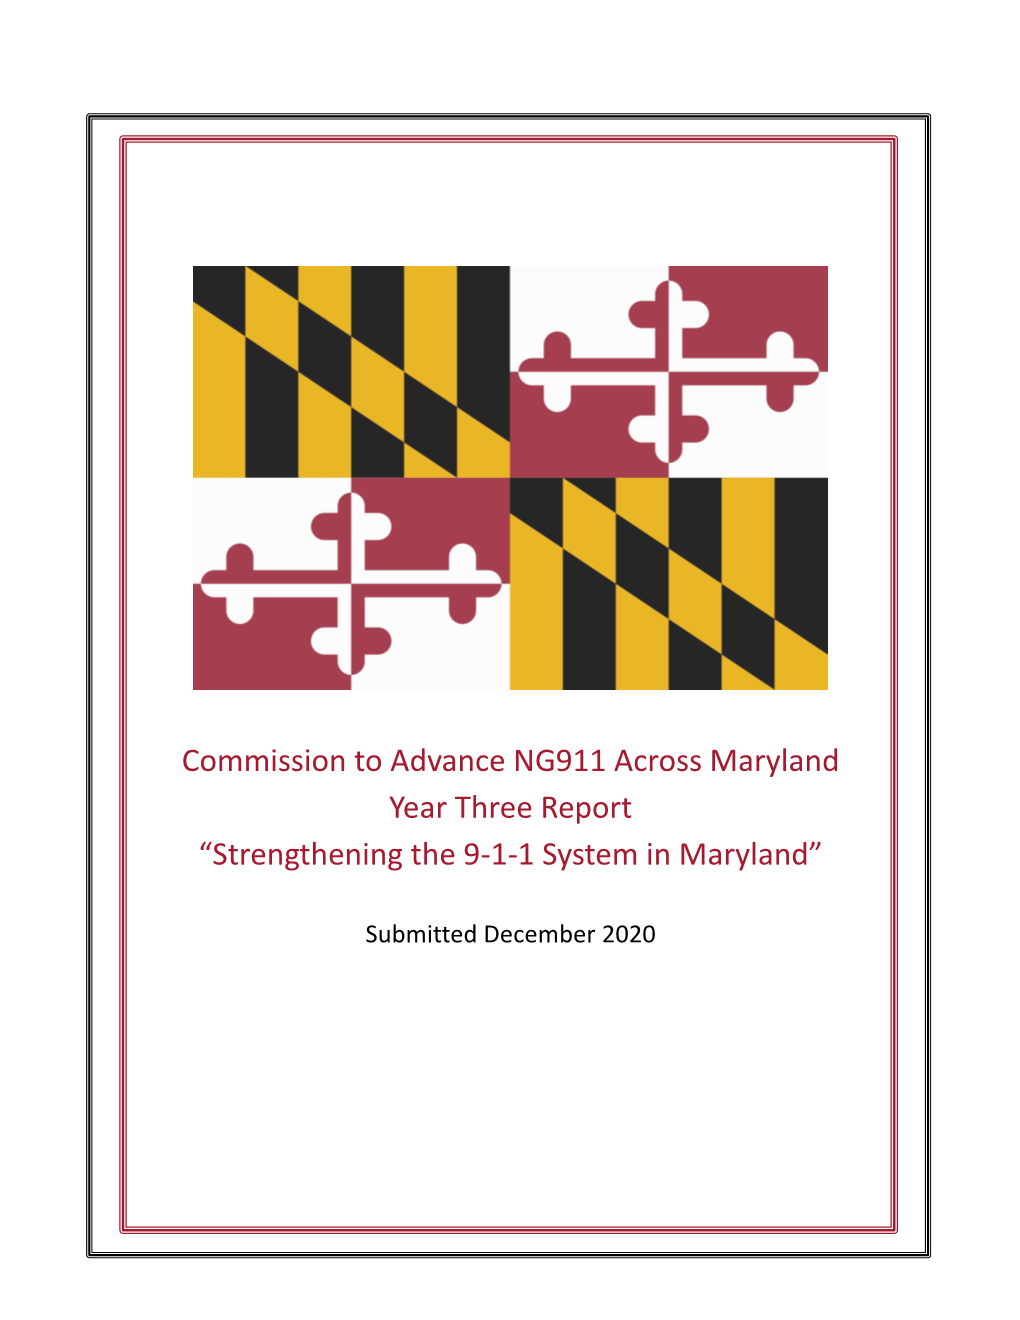 Commission to Advance NG911 Across Maryland Year Three Report